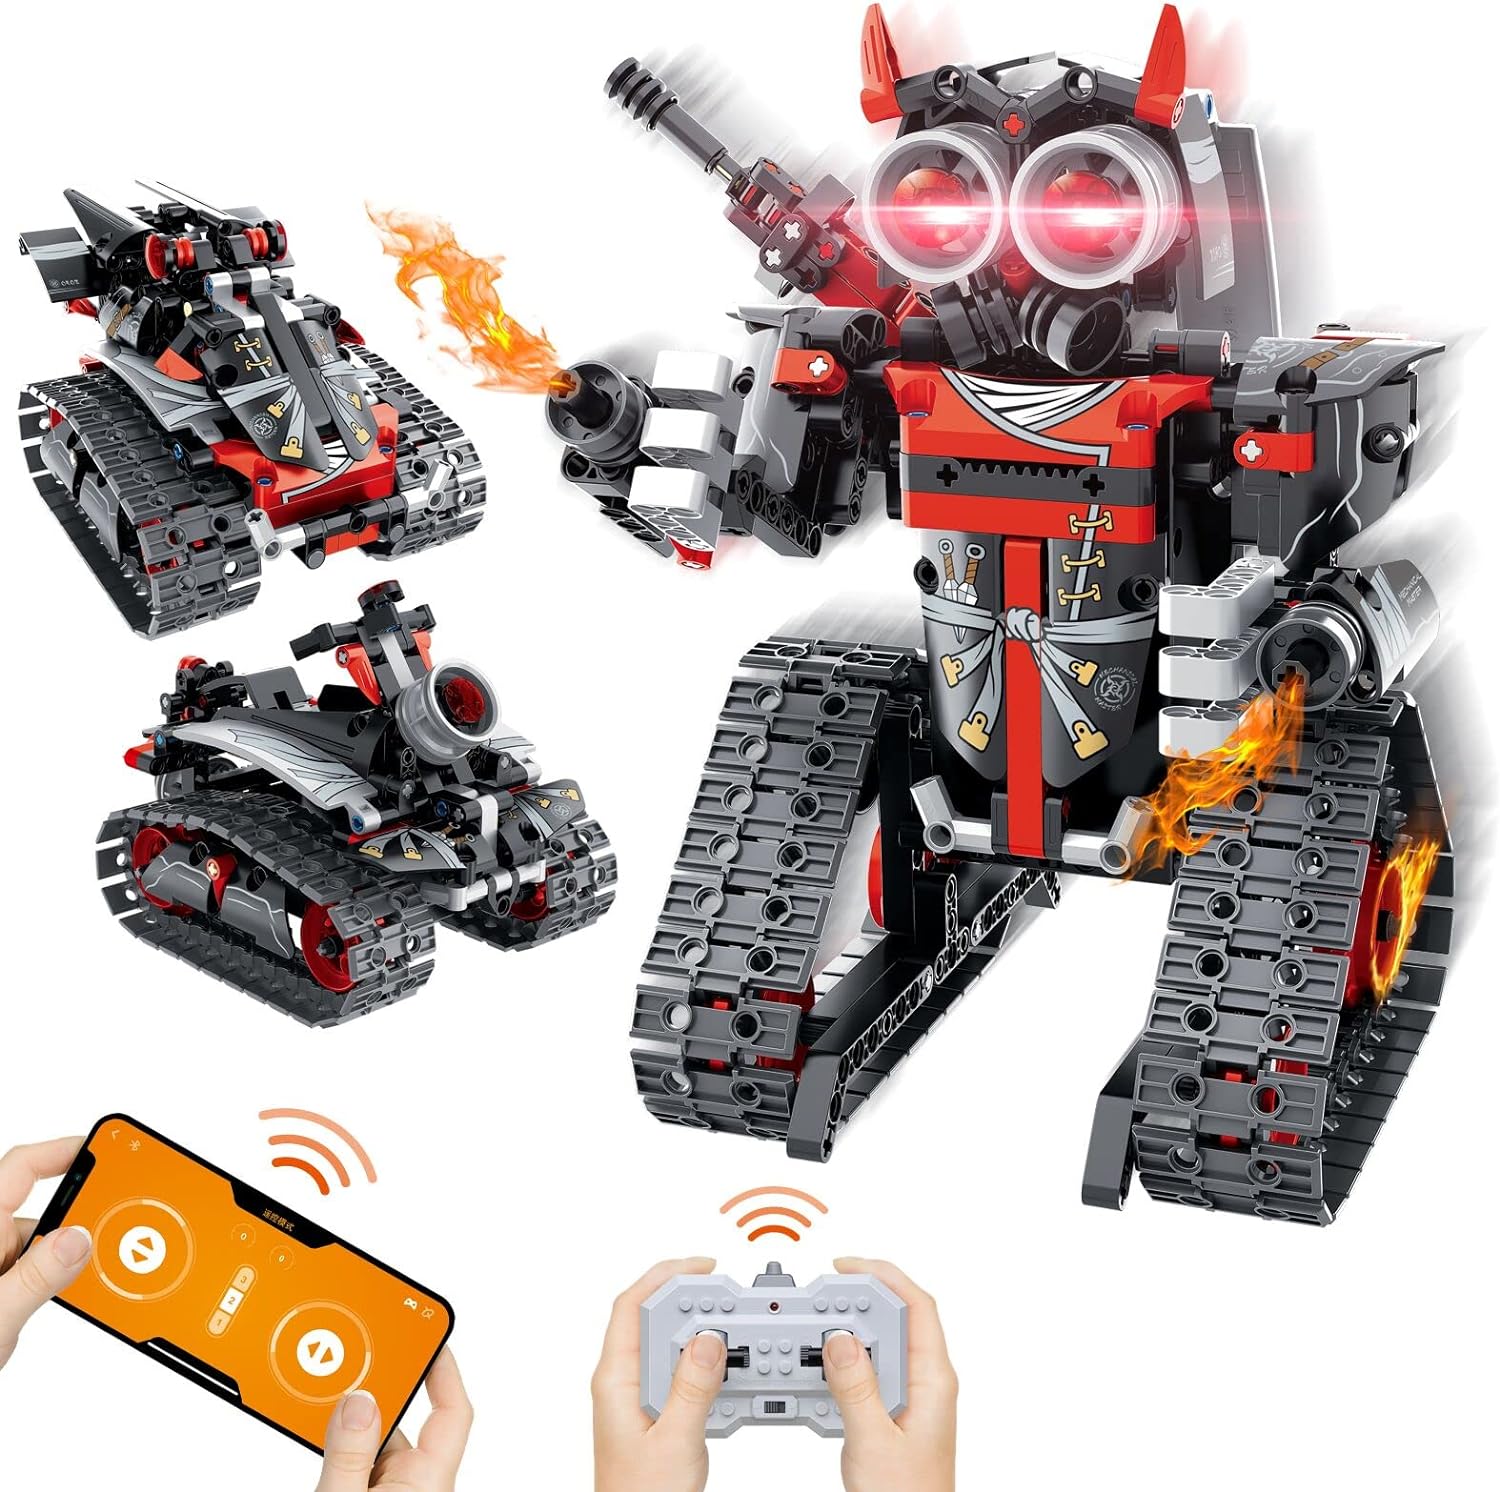 VINTOP Remote Control Robot Building Kit for Boys 6-12, 3-in-1 STEM Remote & APP Controlled Coding Gear Robot/Tank/RC Car, 419 Pcs Science Learning Educational Building Blocks Toy Set Gift for Kids